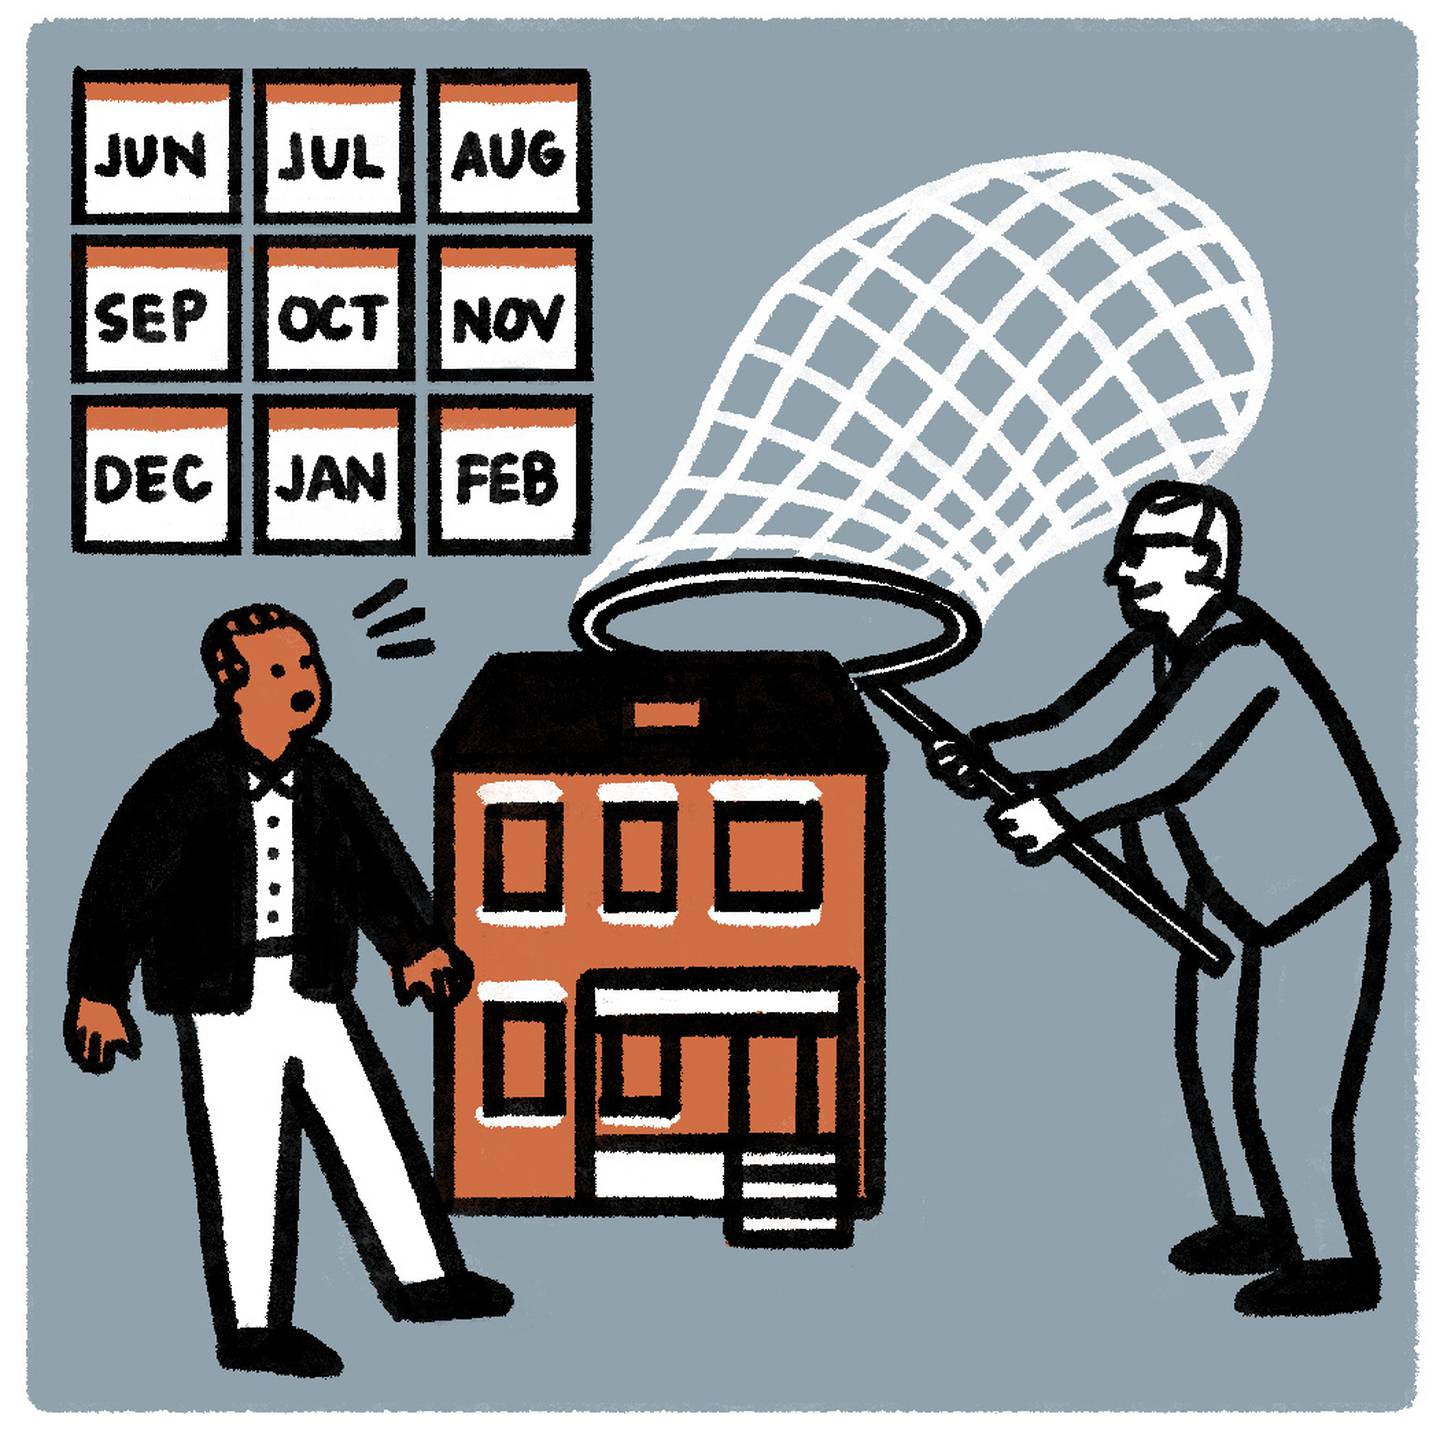 Older man surprised by investor in suit jacket who throws a net over row house. In background there are 9 pages from a monthly calendar, June through February.